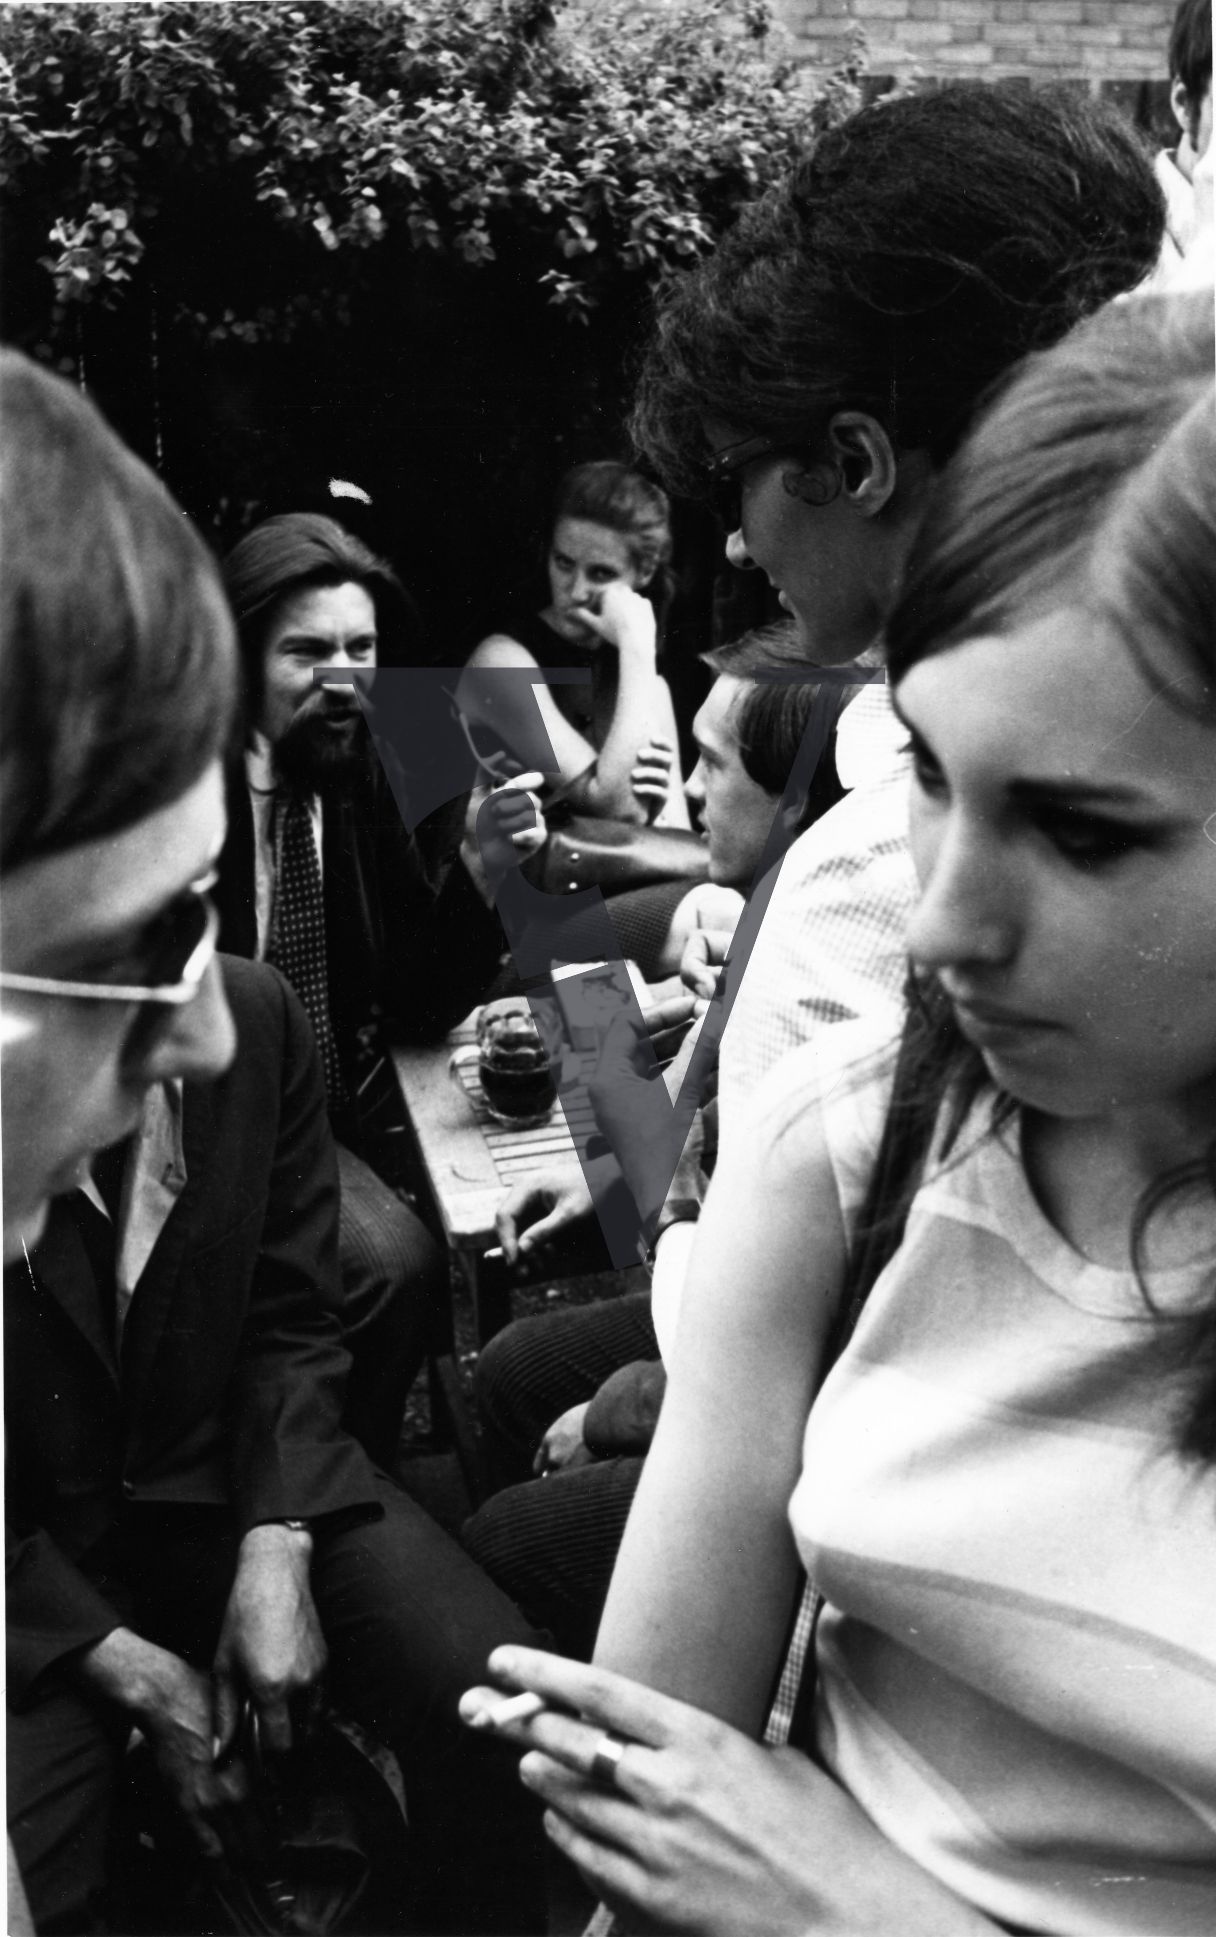 London, Sixties, gathering, drinks and cigarettes.